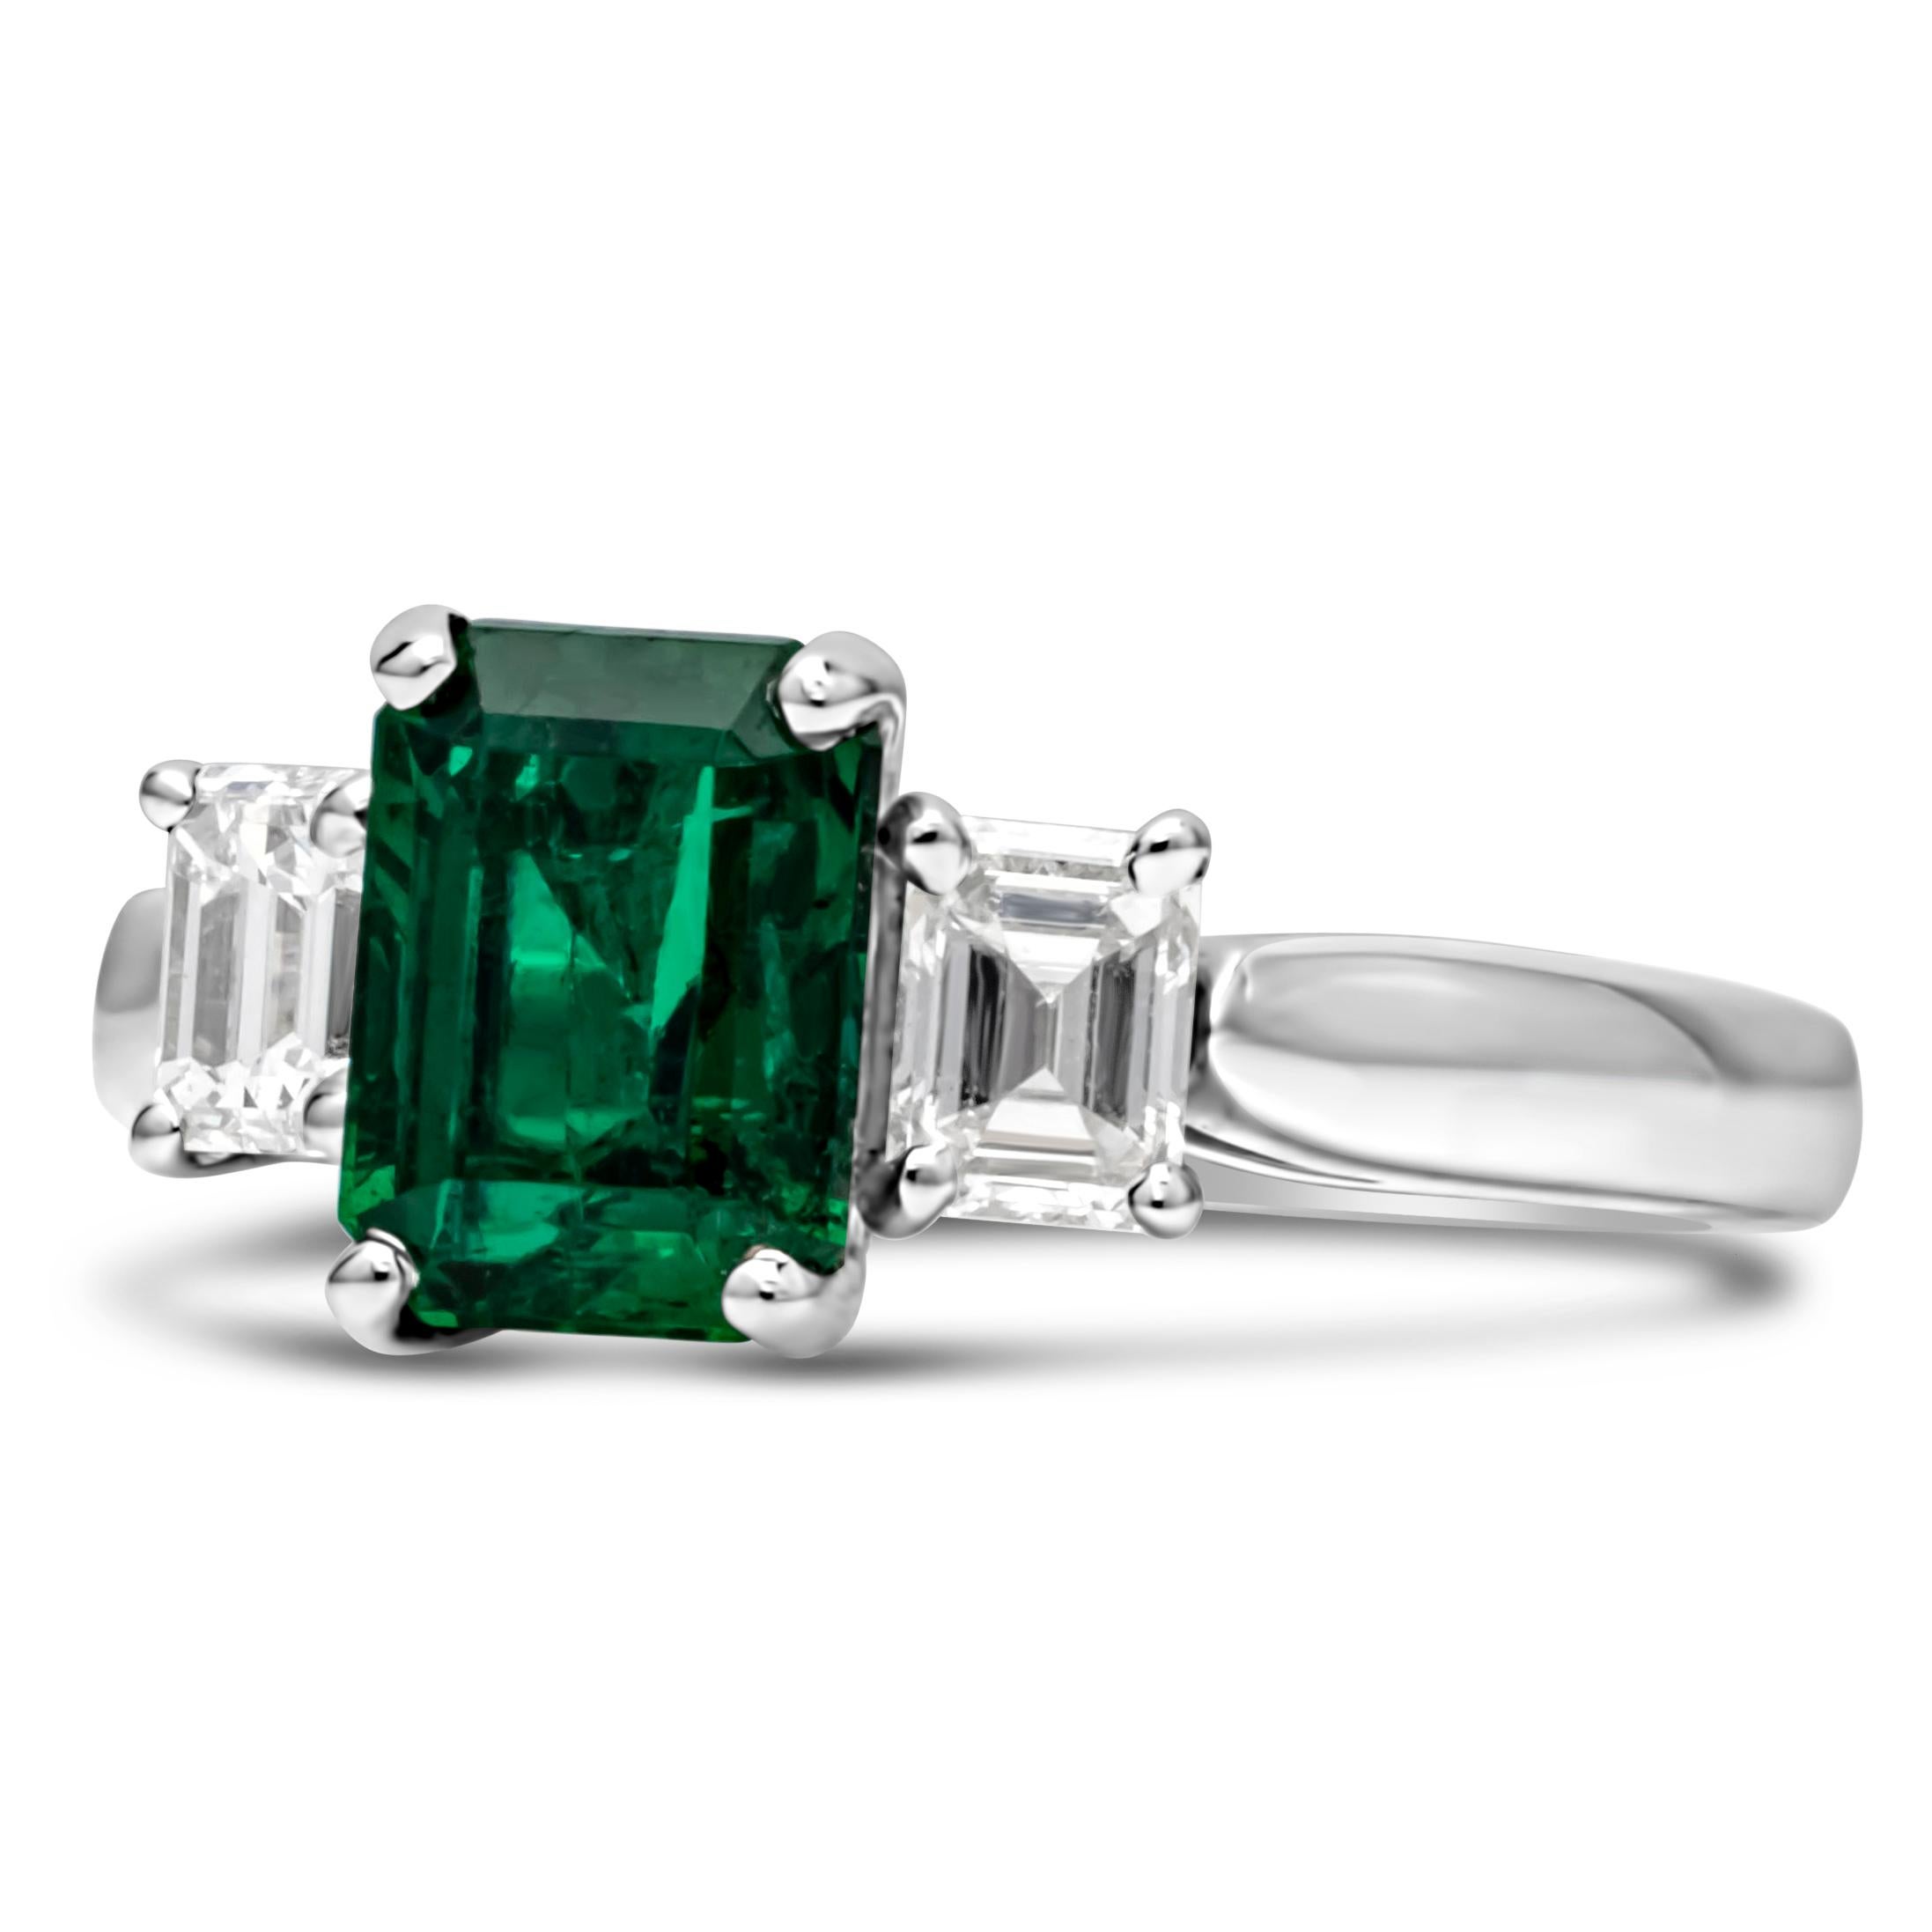 A color-rich three stone engagement ring showcasing a 1.78 carats emerald cut green emerald, set in a classic four prong basket setting. Flanked by two emerald cut brilliant diamond on each side weighing 0.70 carats total, set in a four prong basket